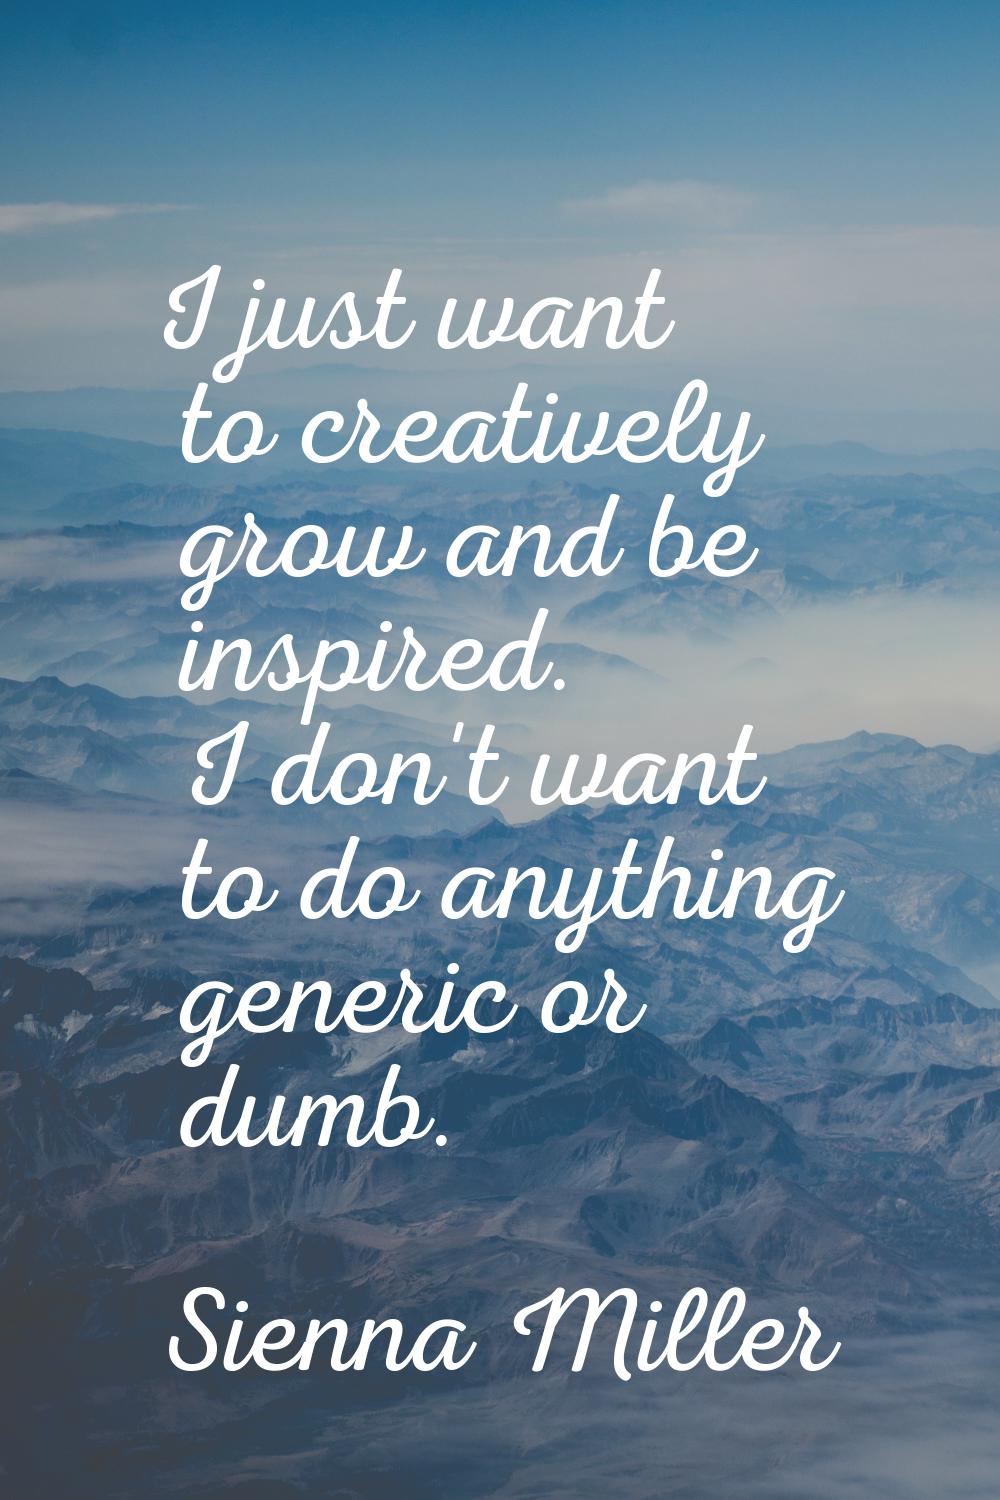 I just want to creatively grow and be inspired. I don't want to do anything generic or dumb.